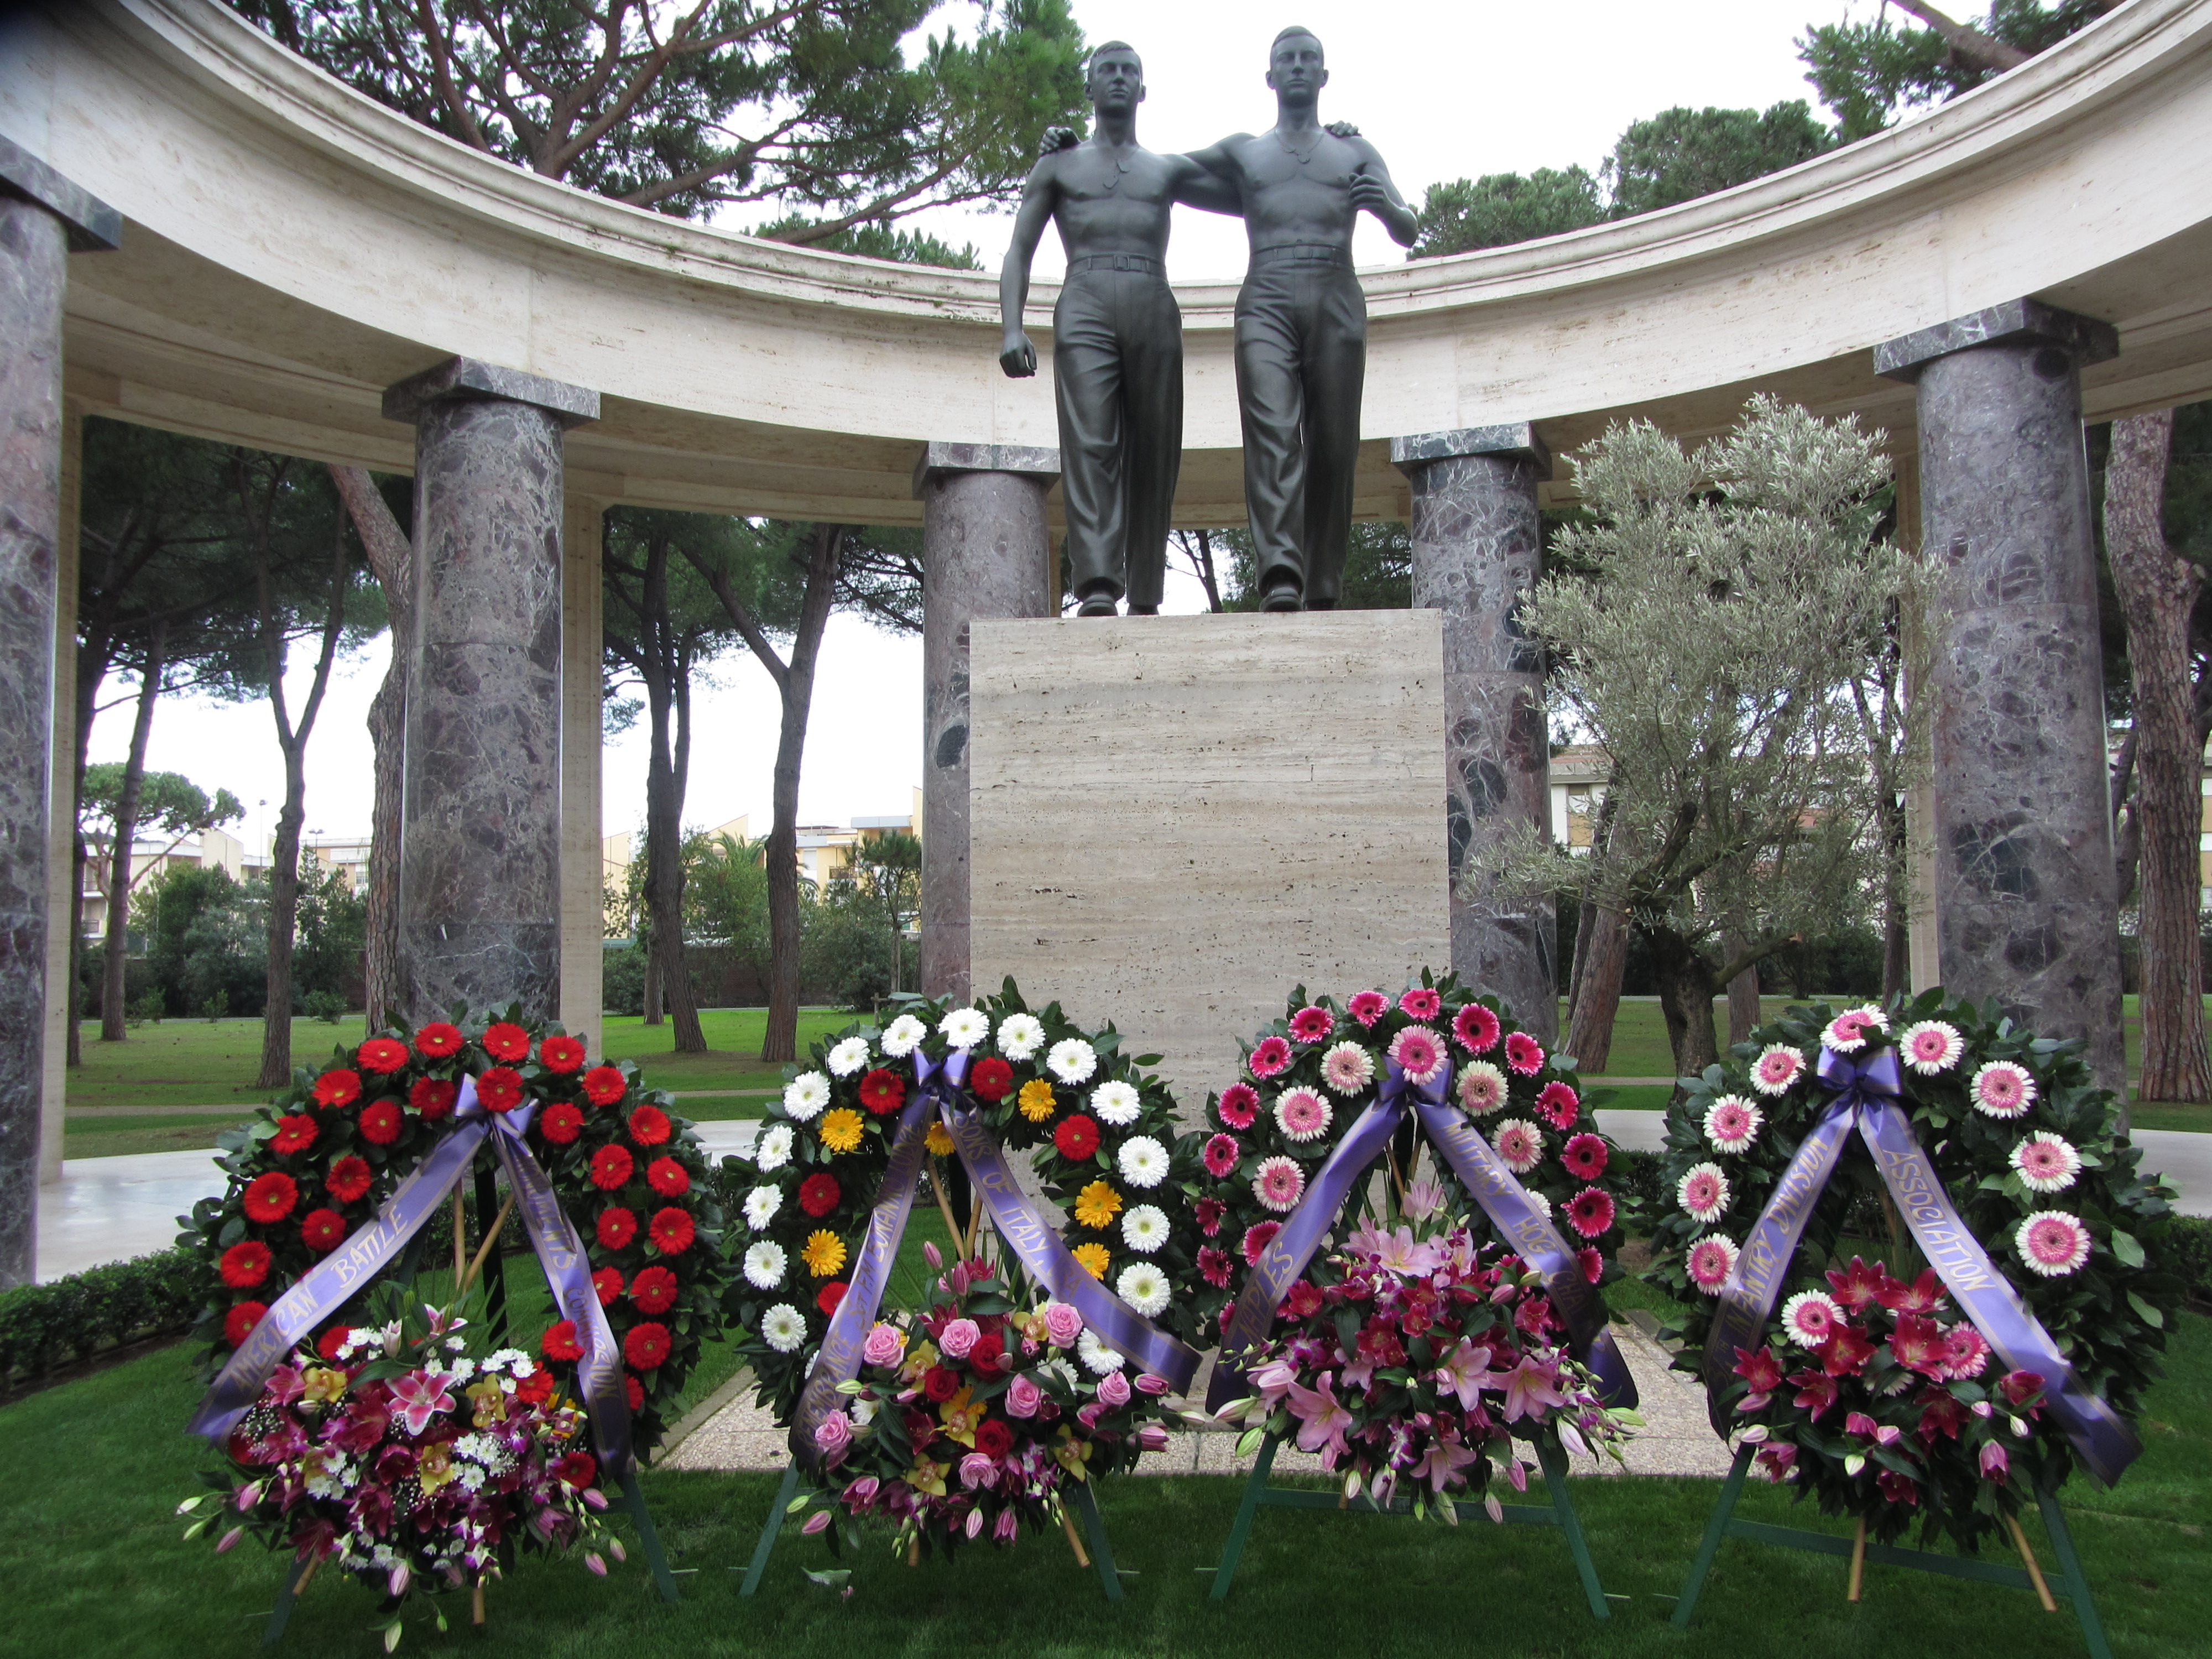 Floral wreaths were laid in front of the Brothers in Arms statue. 